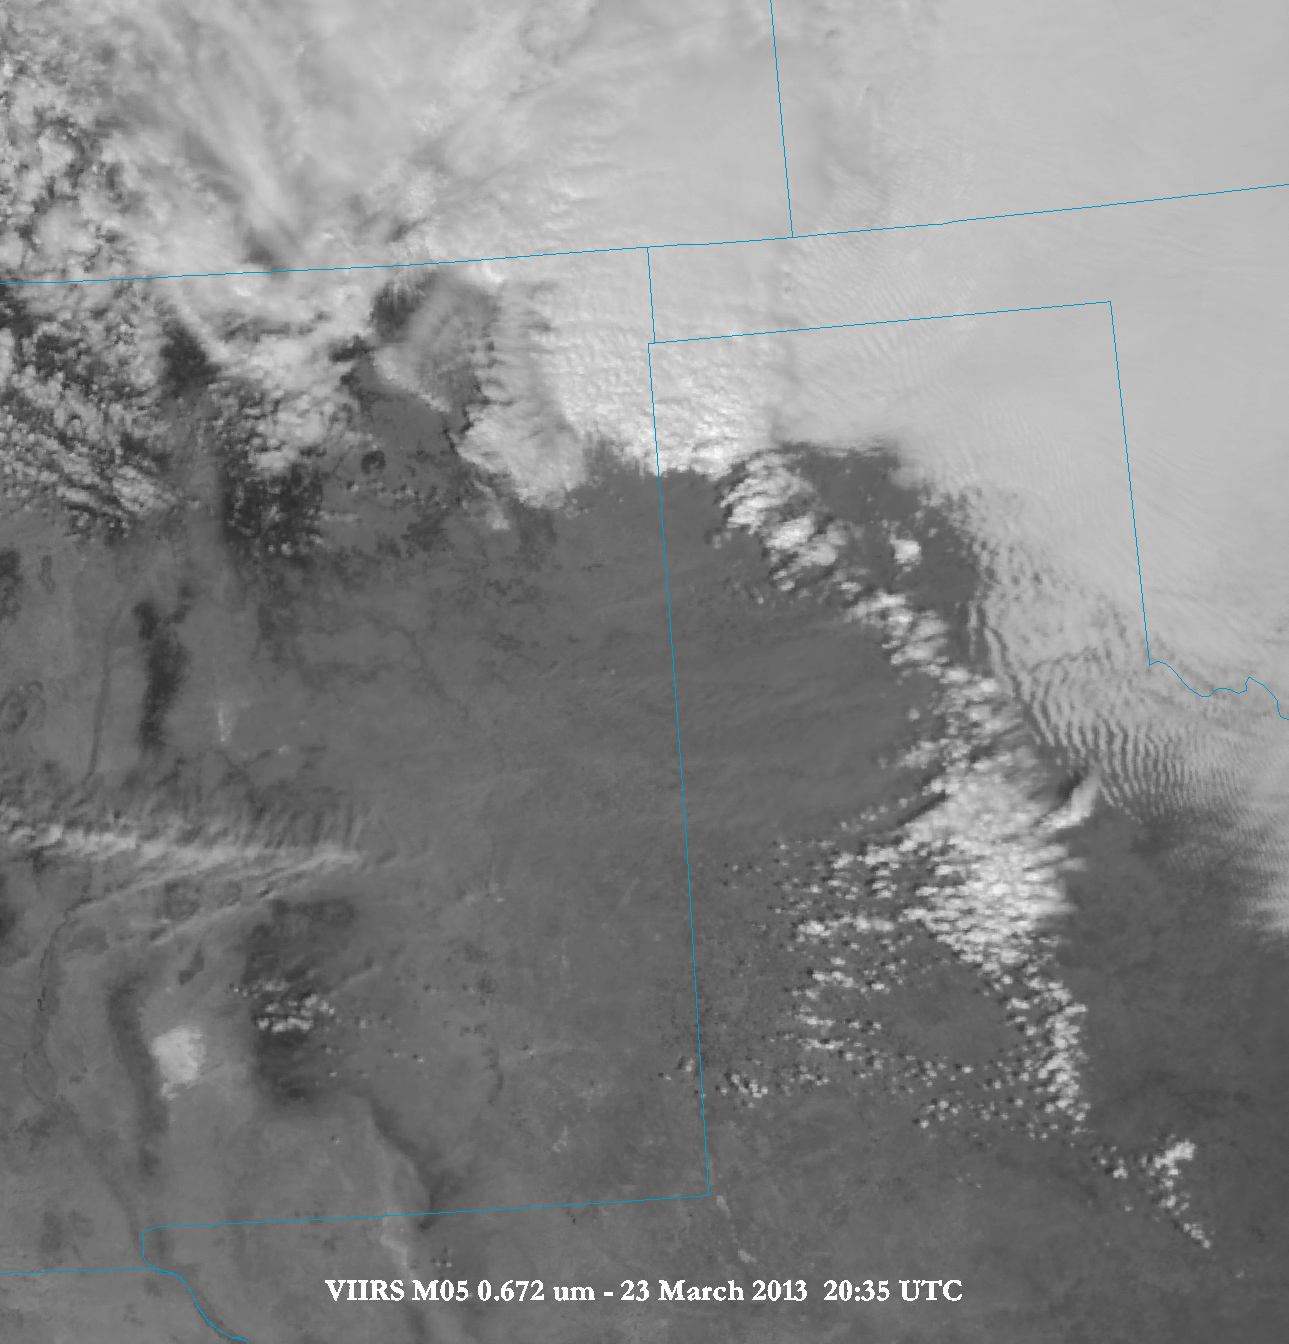 Suomi NPP VIIRS 0.672 µm Visible and 1.378 µm near-IR "Cirrus" images [click to enlarge]